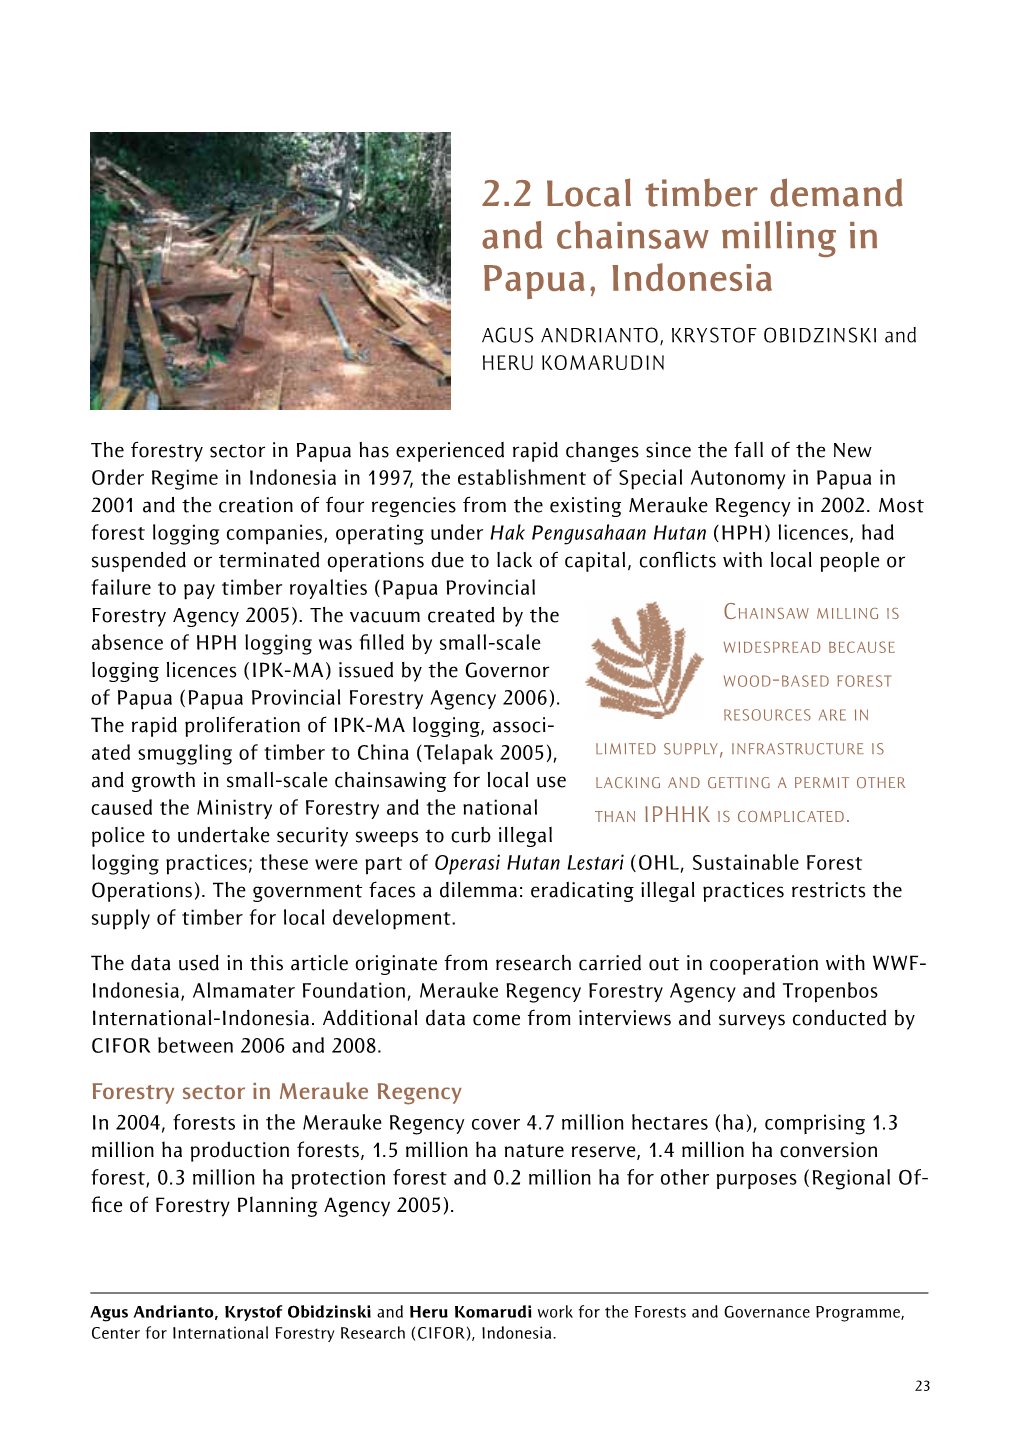 2.2 Local Timber Demand and Chainsaw Milling in Papua, Indonesia